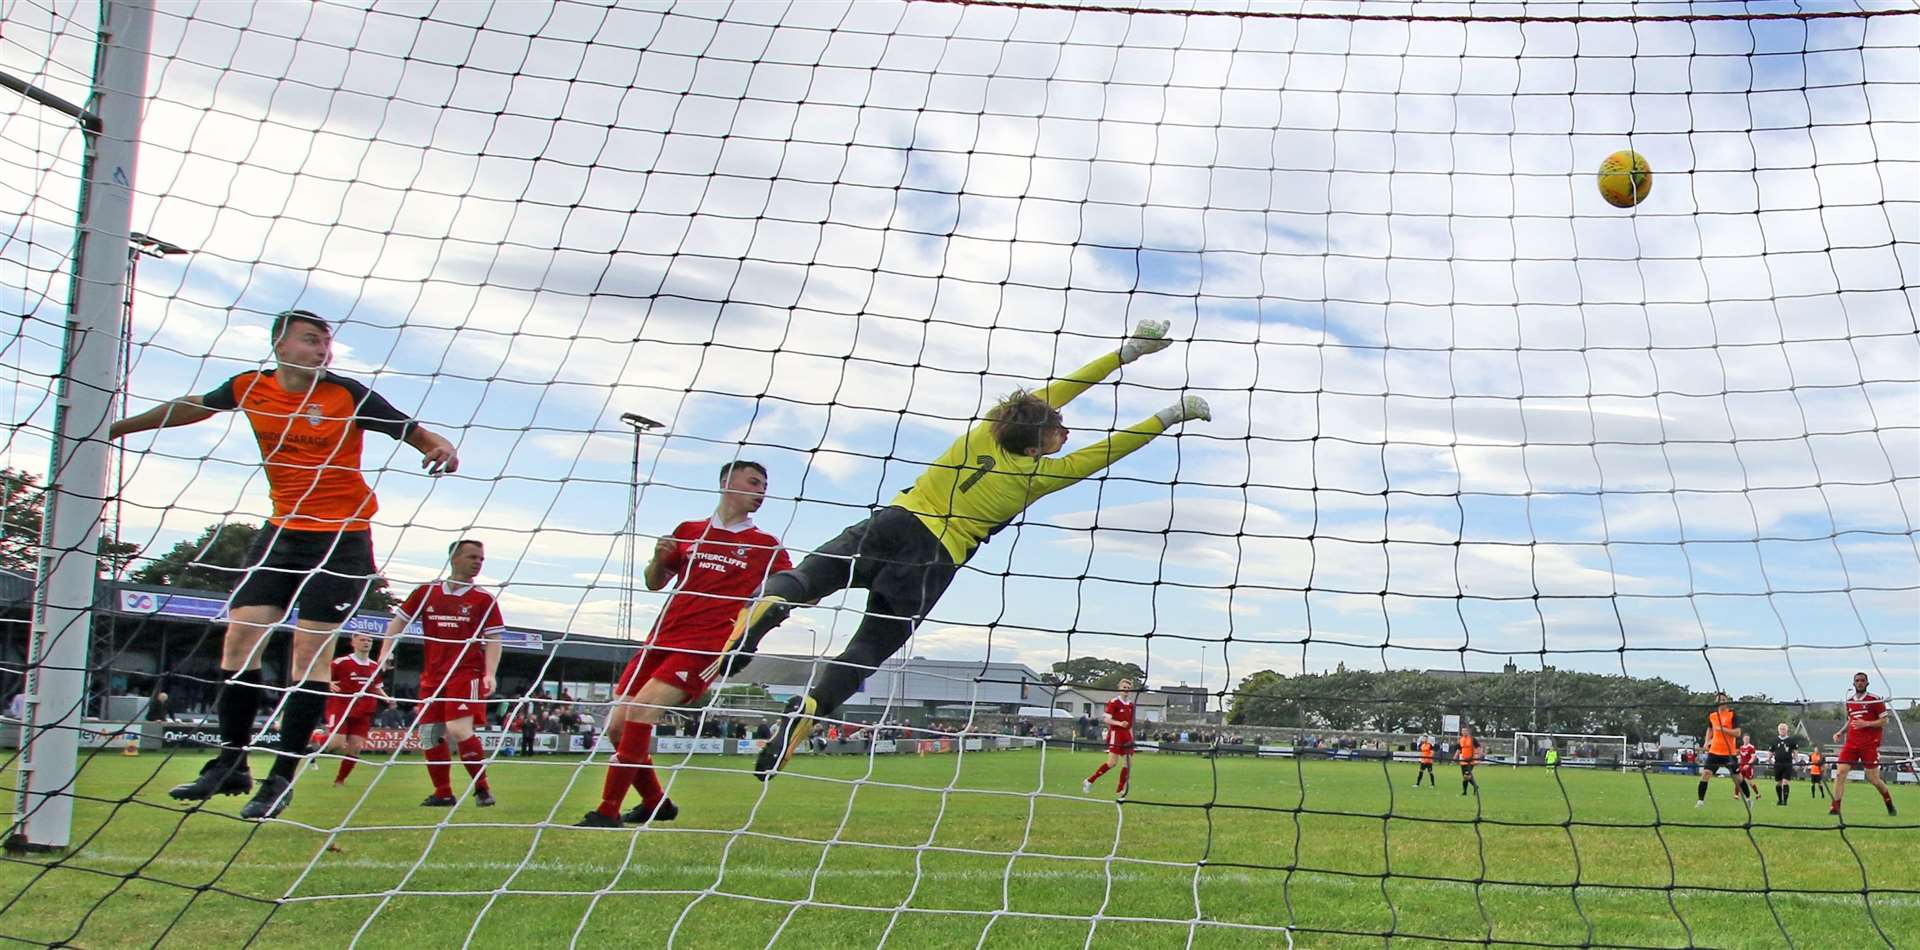 Wick Groats keeper Kieran Macleod at full stretch as a shot goes wide in last season's Highland Amateur Cup final at Harmsworth Park. Avoch won 1-0. Picture: James Gunn